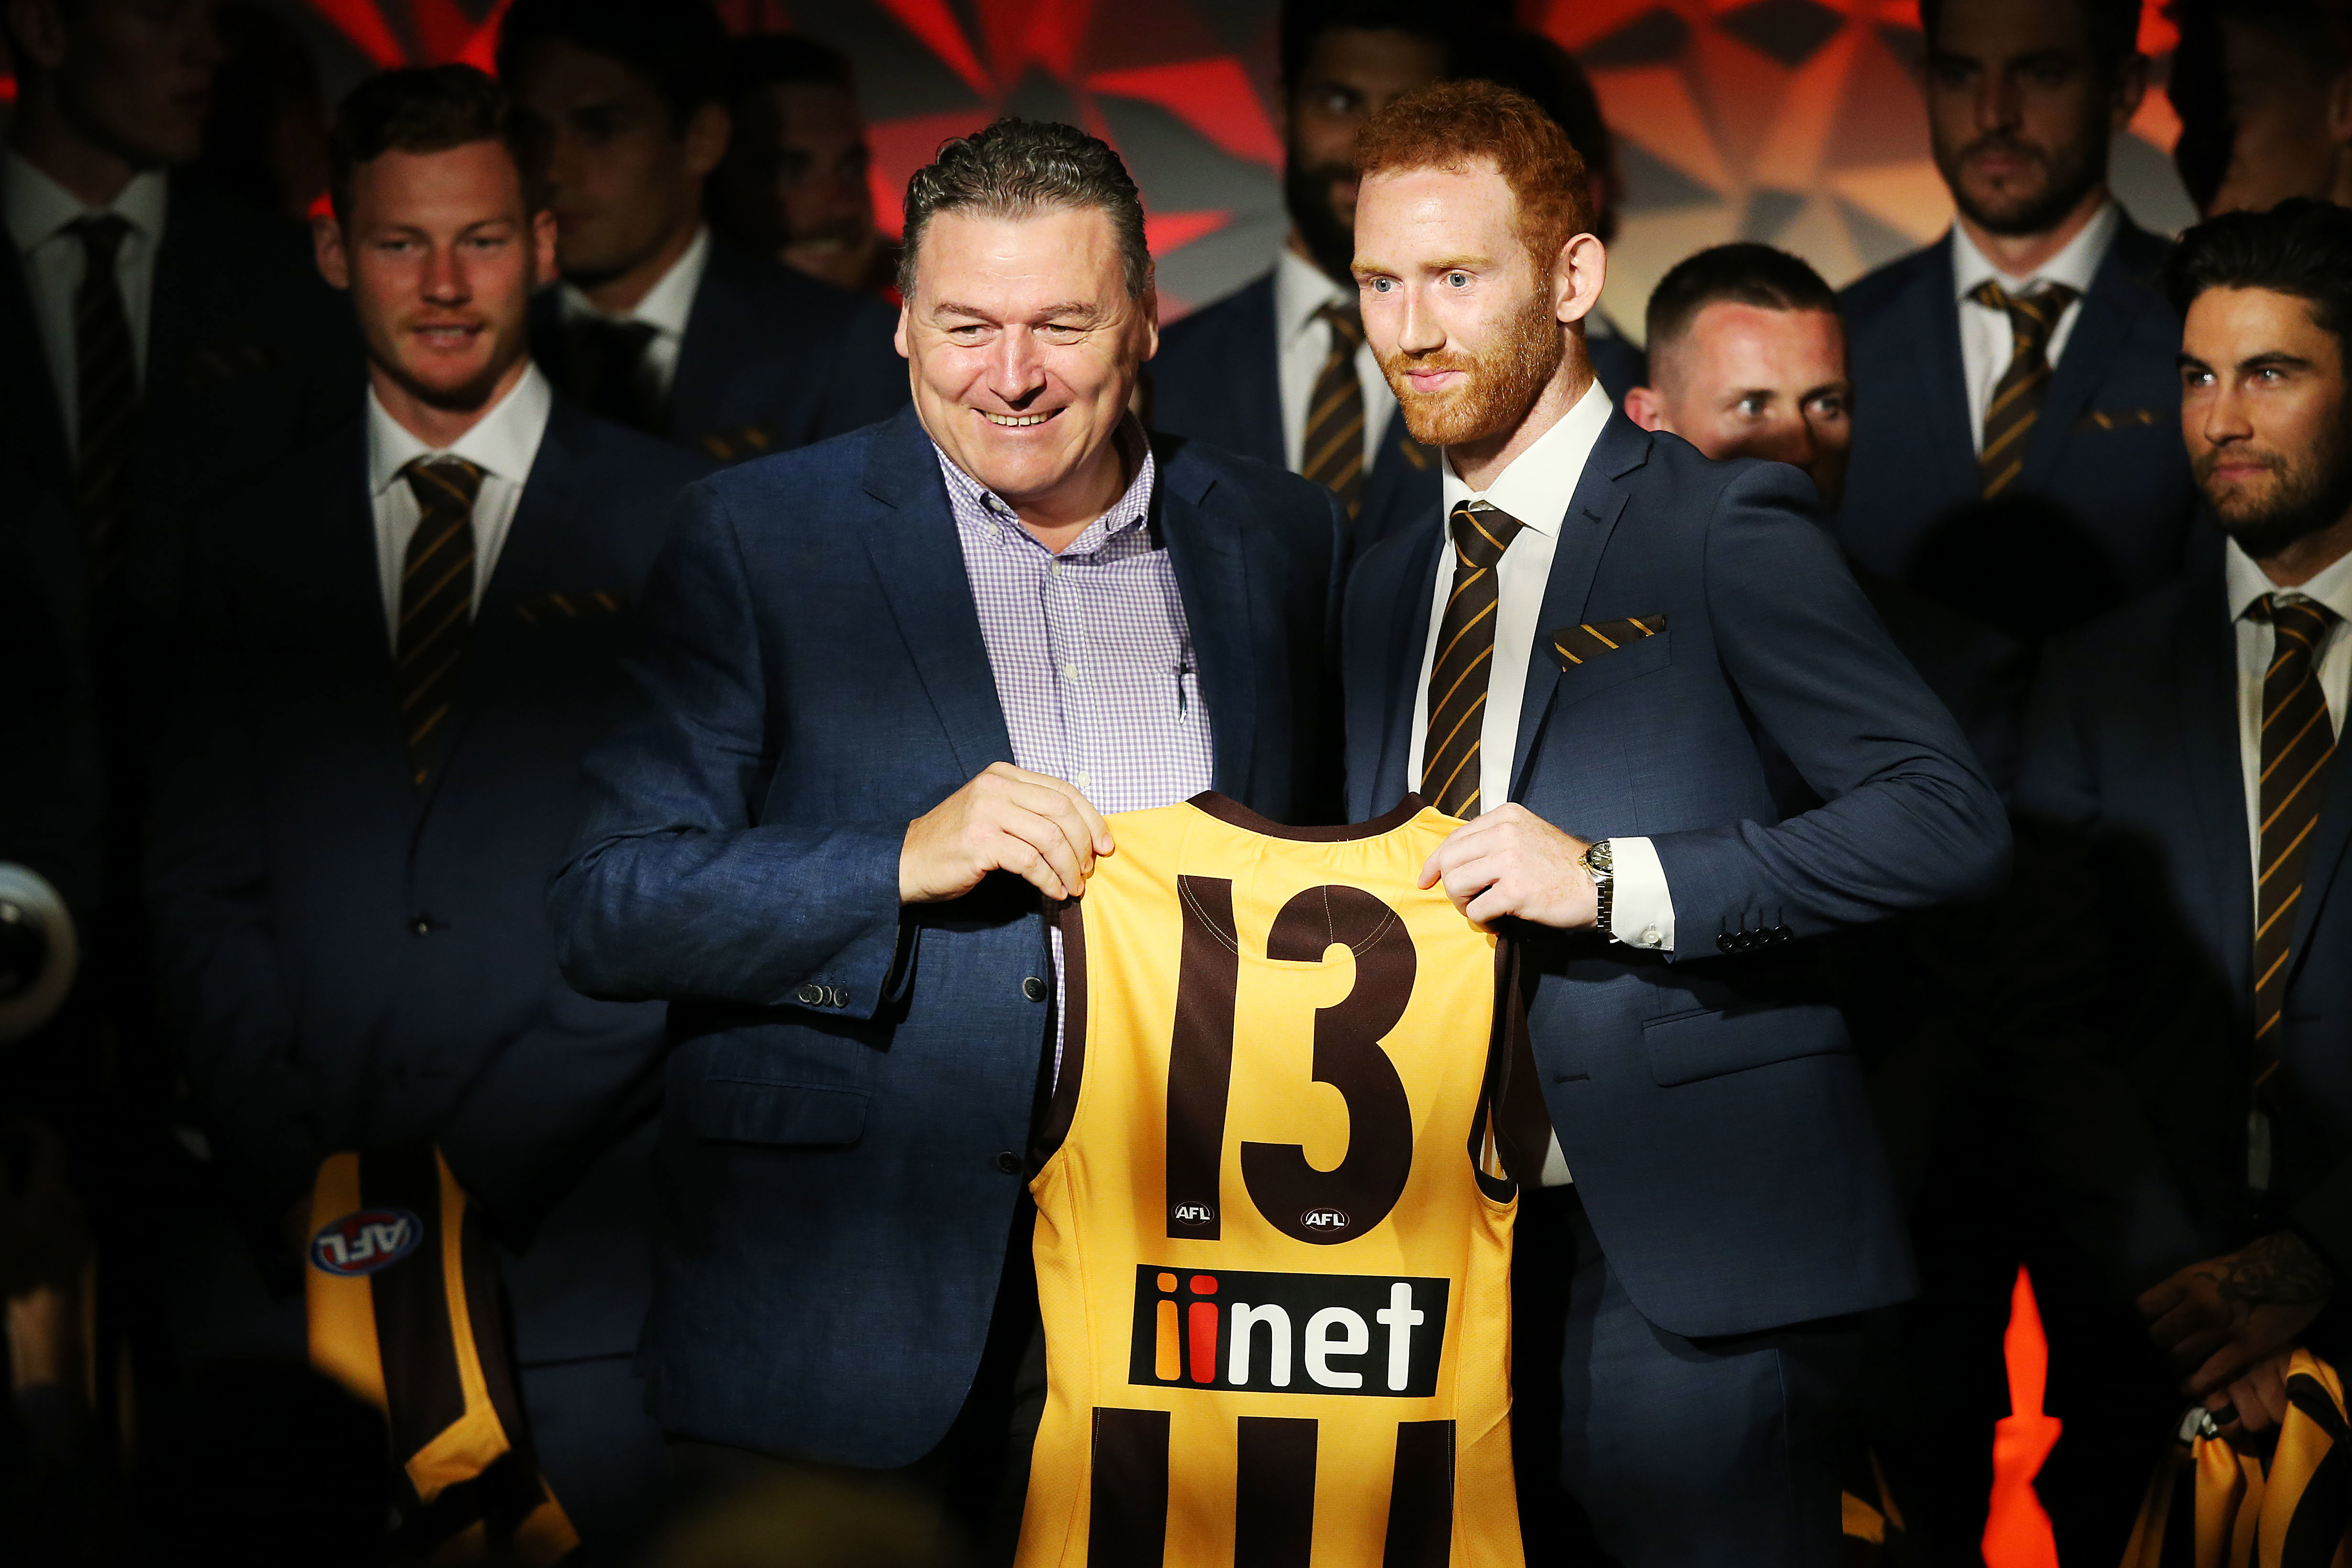 Paul Dear presenting Conor Glass with his jumper back in 2019.